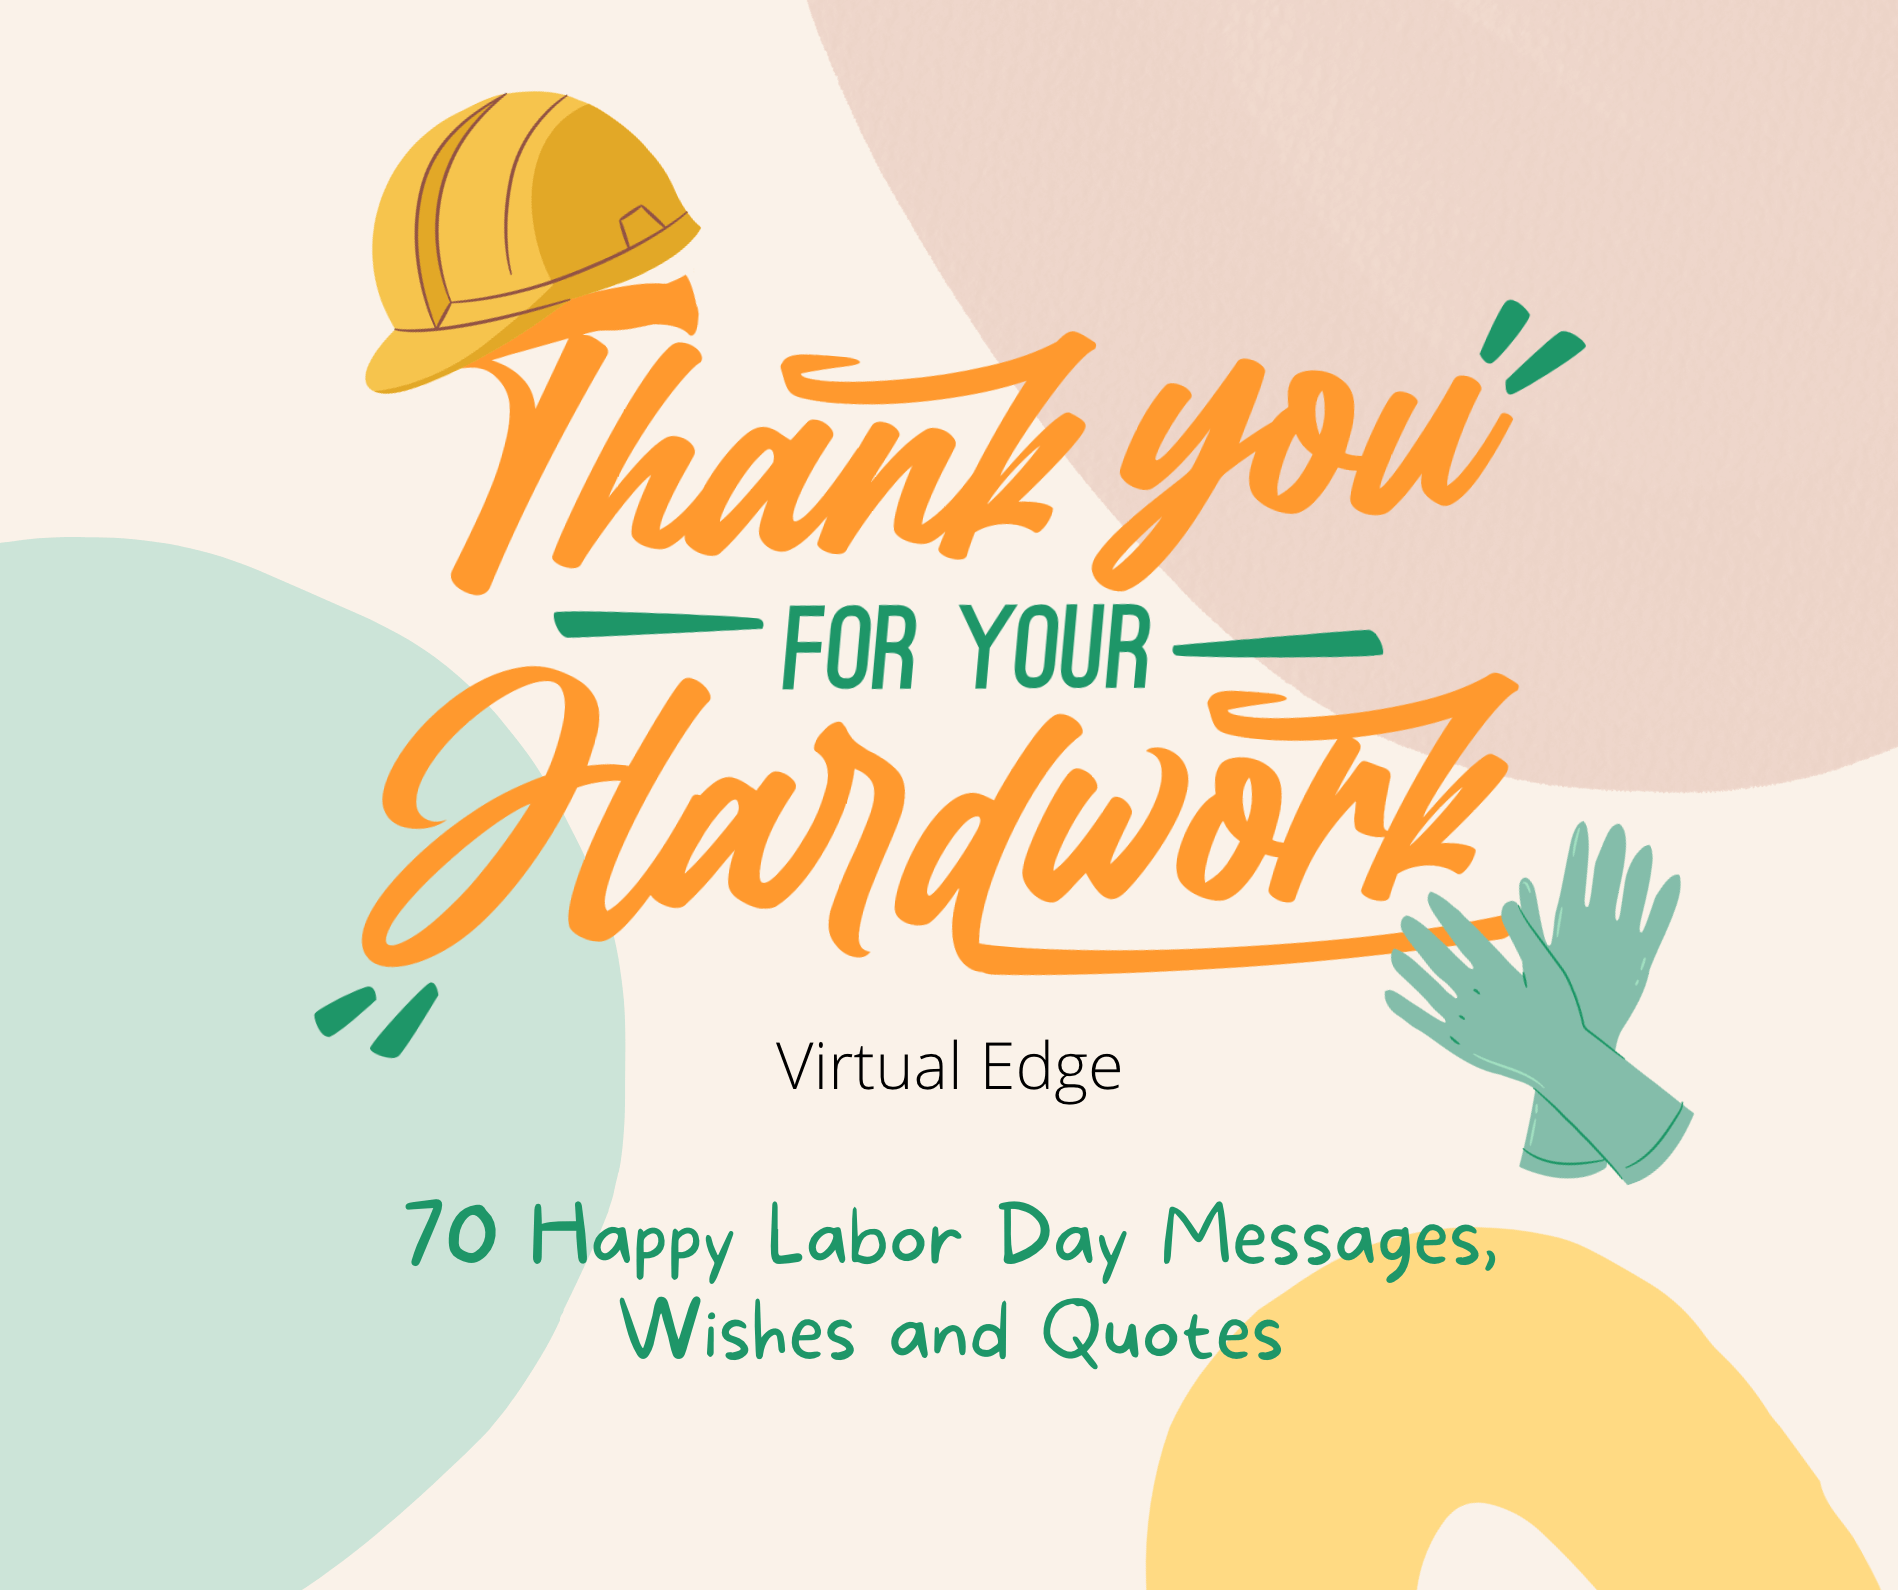 70 Happy Labor Day Messages, Wishes and Quotes Virtual Edge